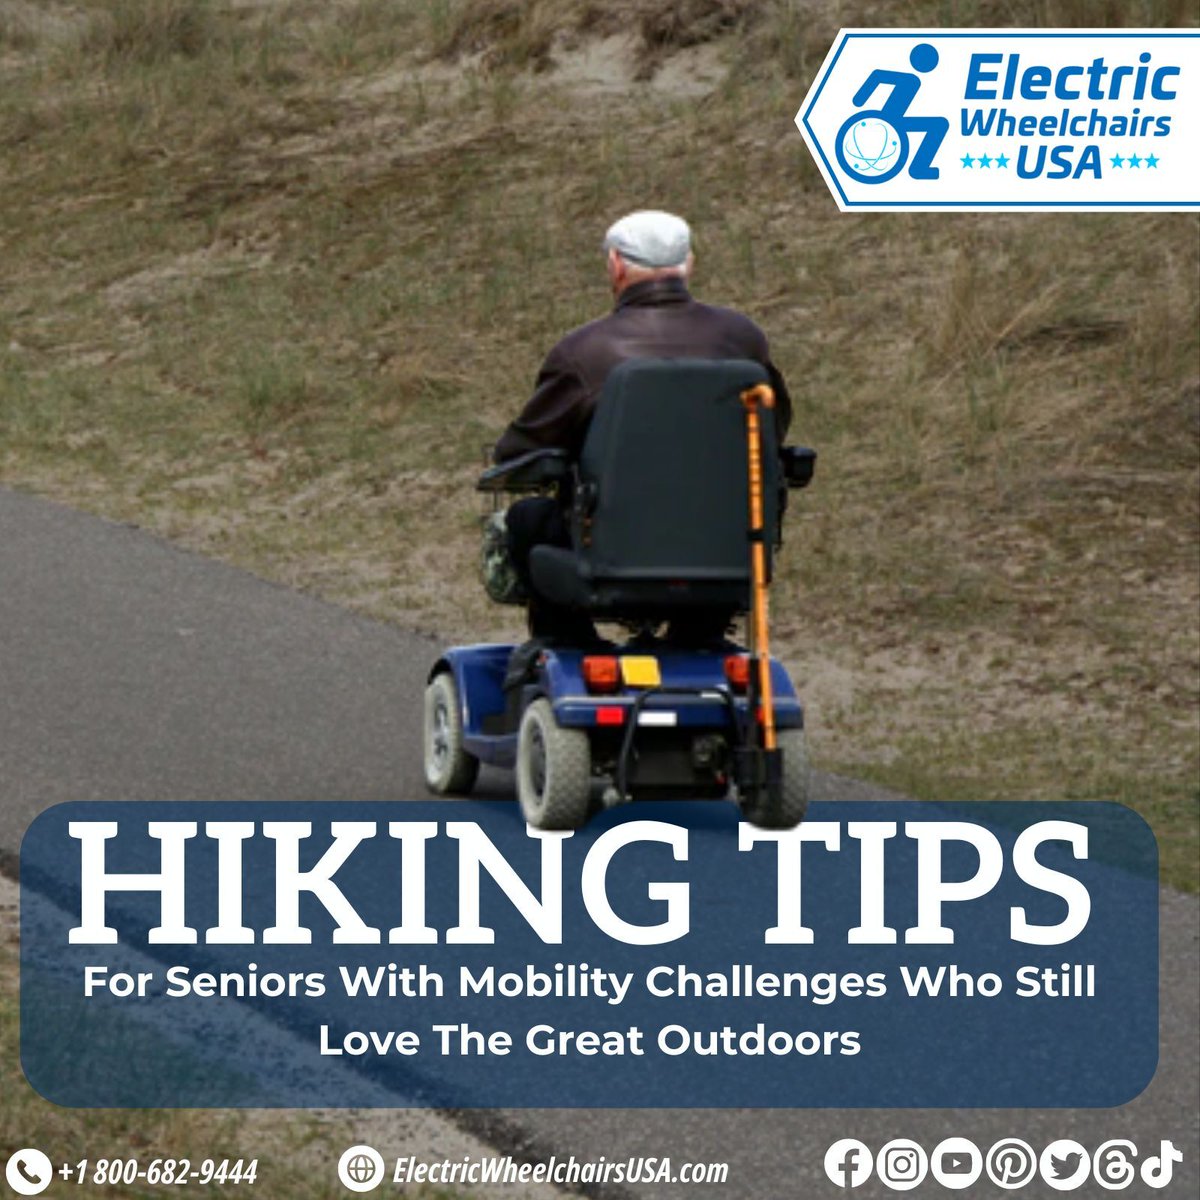 Age shouldn't limit outdoor enjoyment! Even seniors with mobility challenges can hike, though aging may bring mobility issues.

Click the link below to learn more👇
electricwheelchairsusa.com/blogs/news/hik…

#ElectricWheelchairsUSA #ActiveSeniors #NatureHiking #MobilityFriendly #AgeNoBarrier